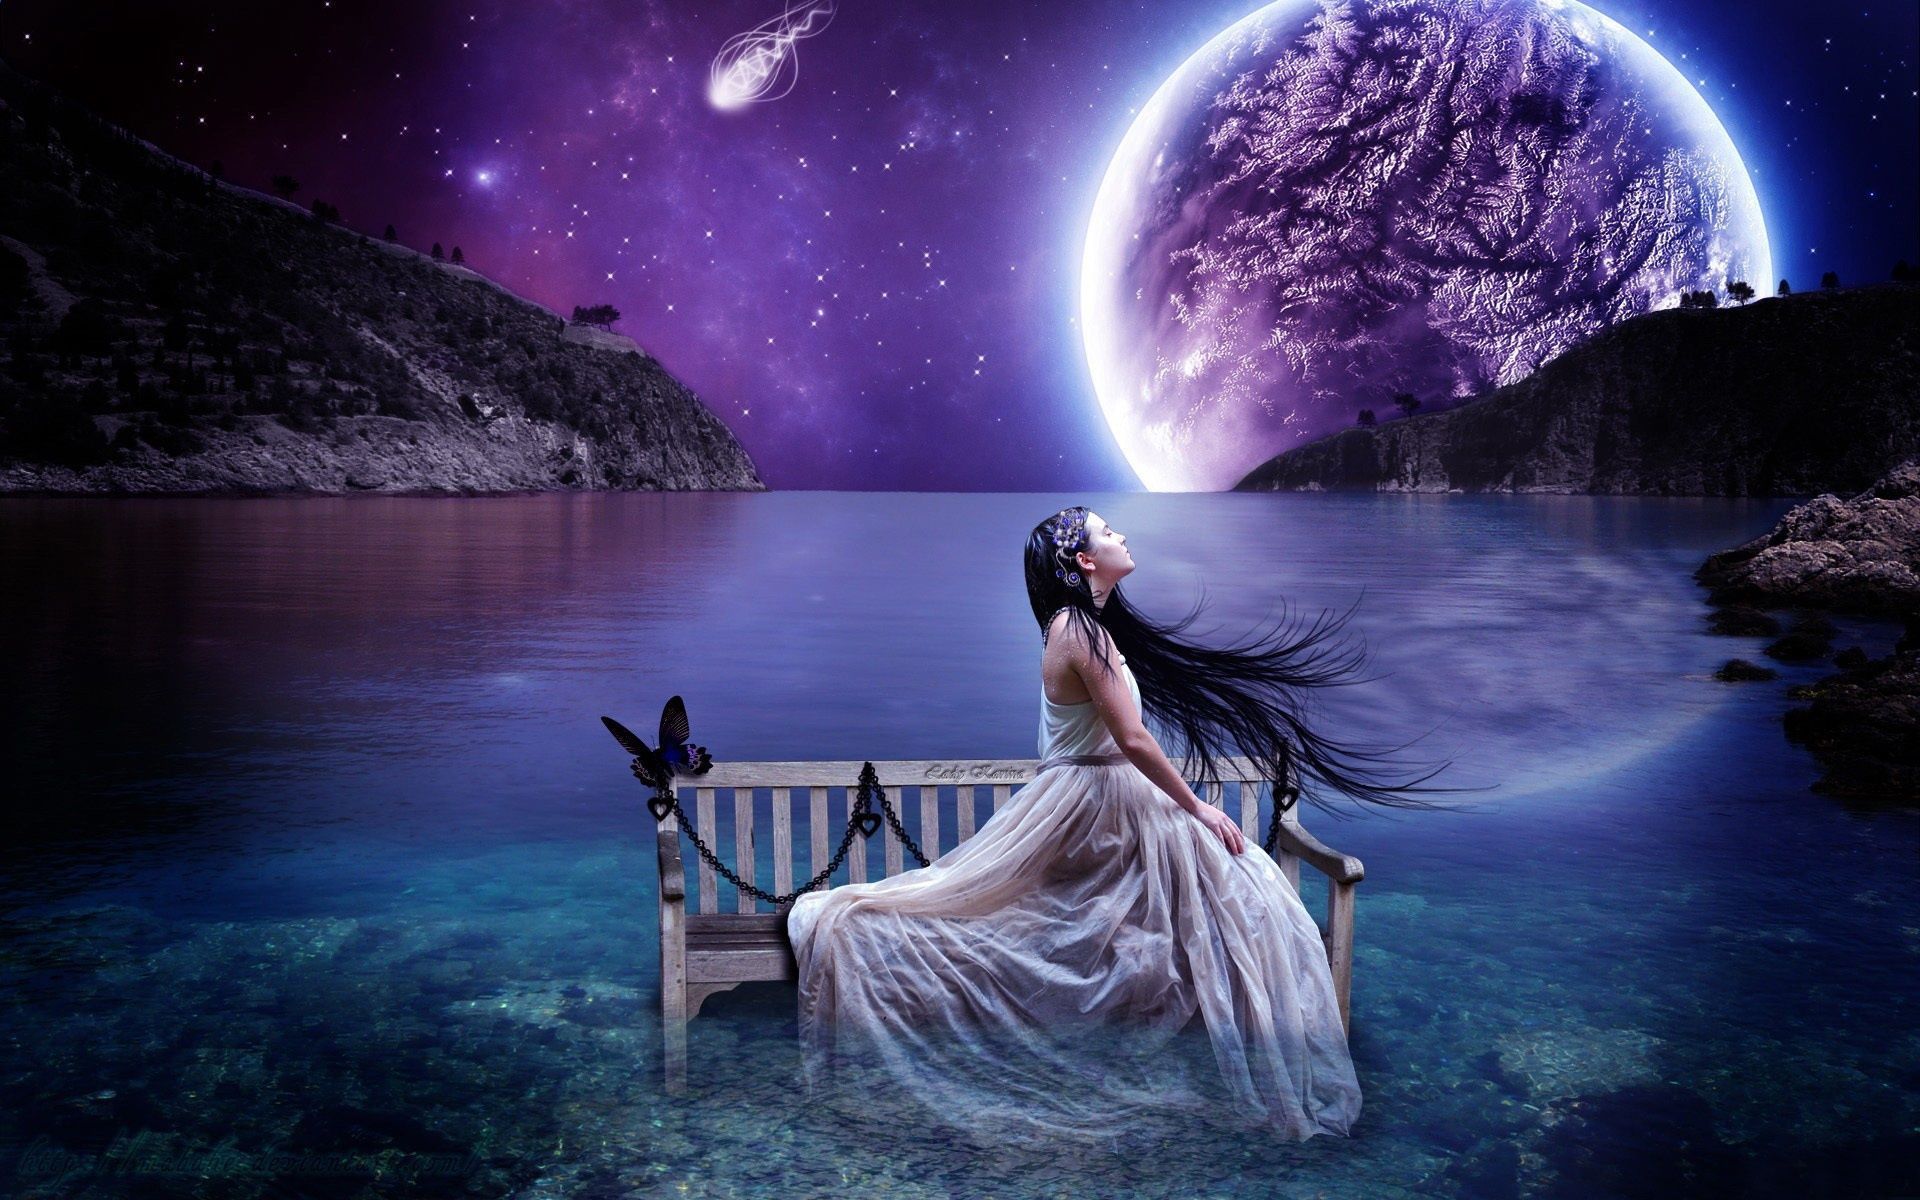 Wallpaper Aesthetic creative landscape, lake water benches girl, sky planet 1920x1200 HD Picture, Image